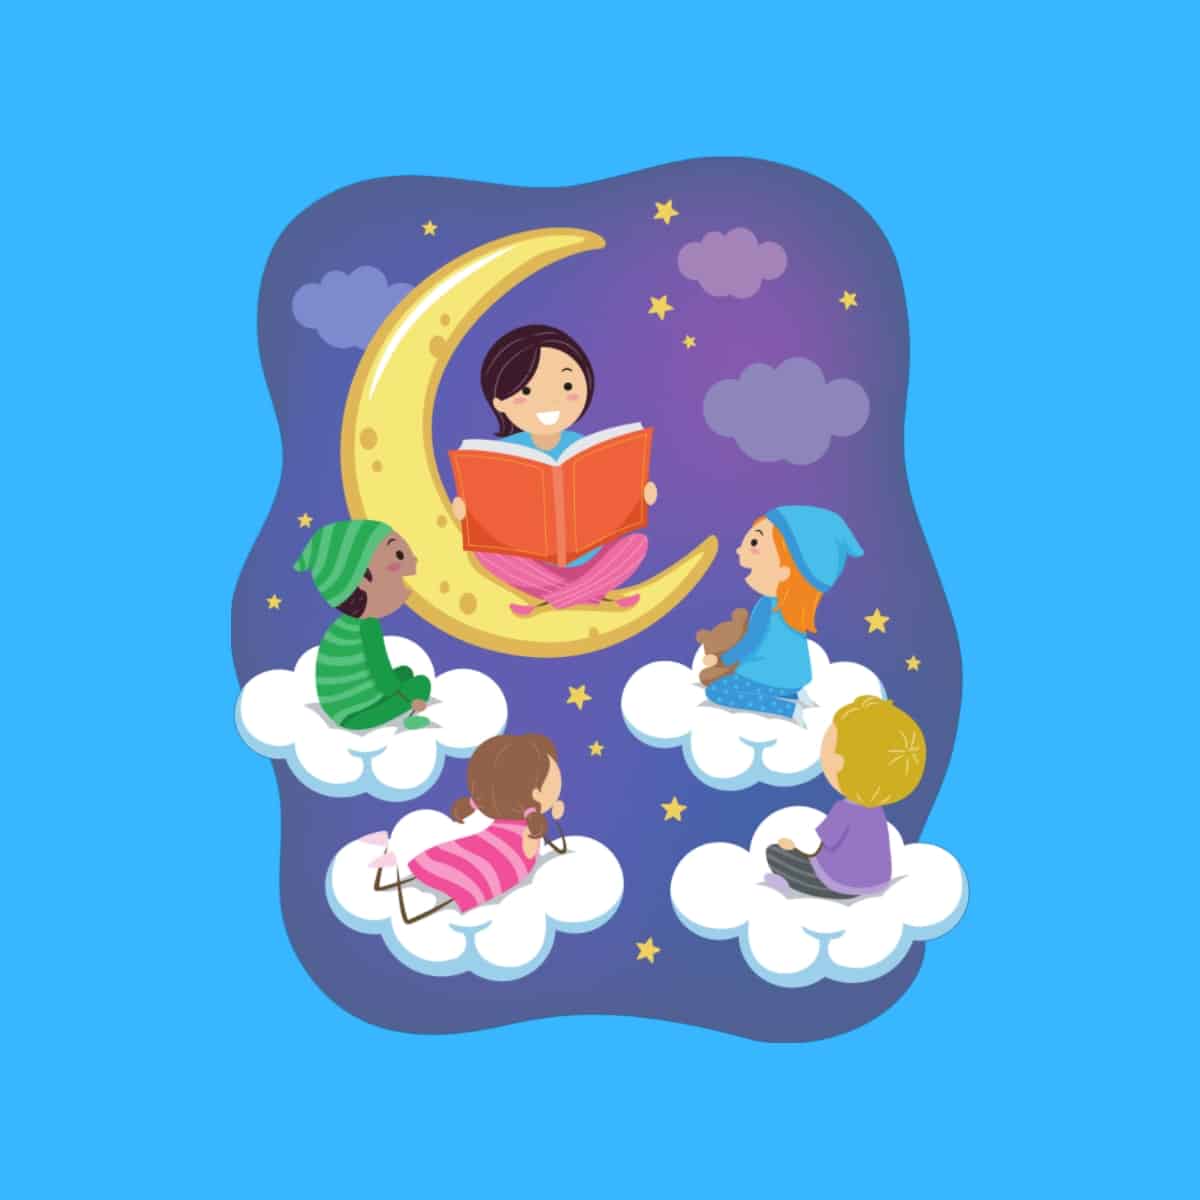 Cartoon graphic of a woman reading a good night book to 4 children sleeping on clouds on a blue background.